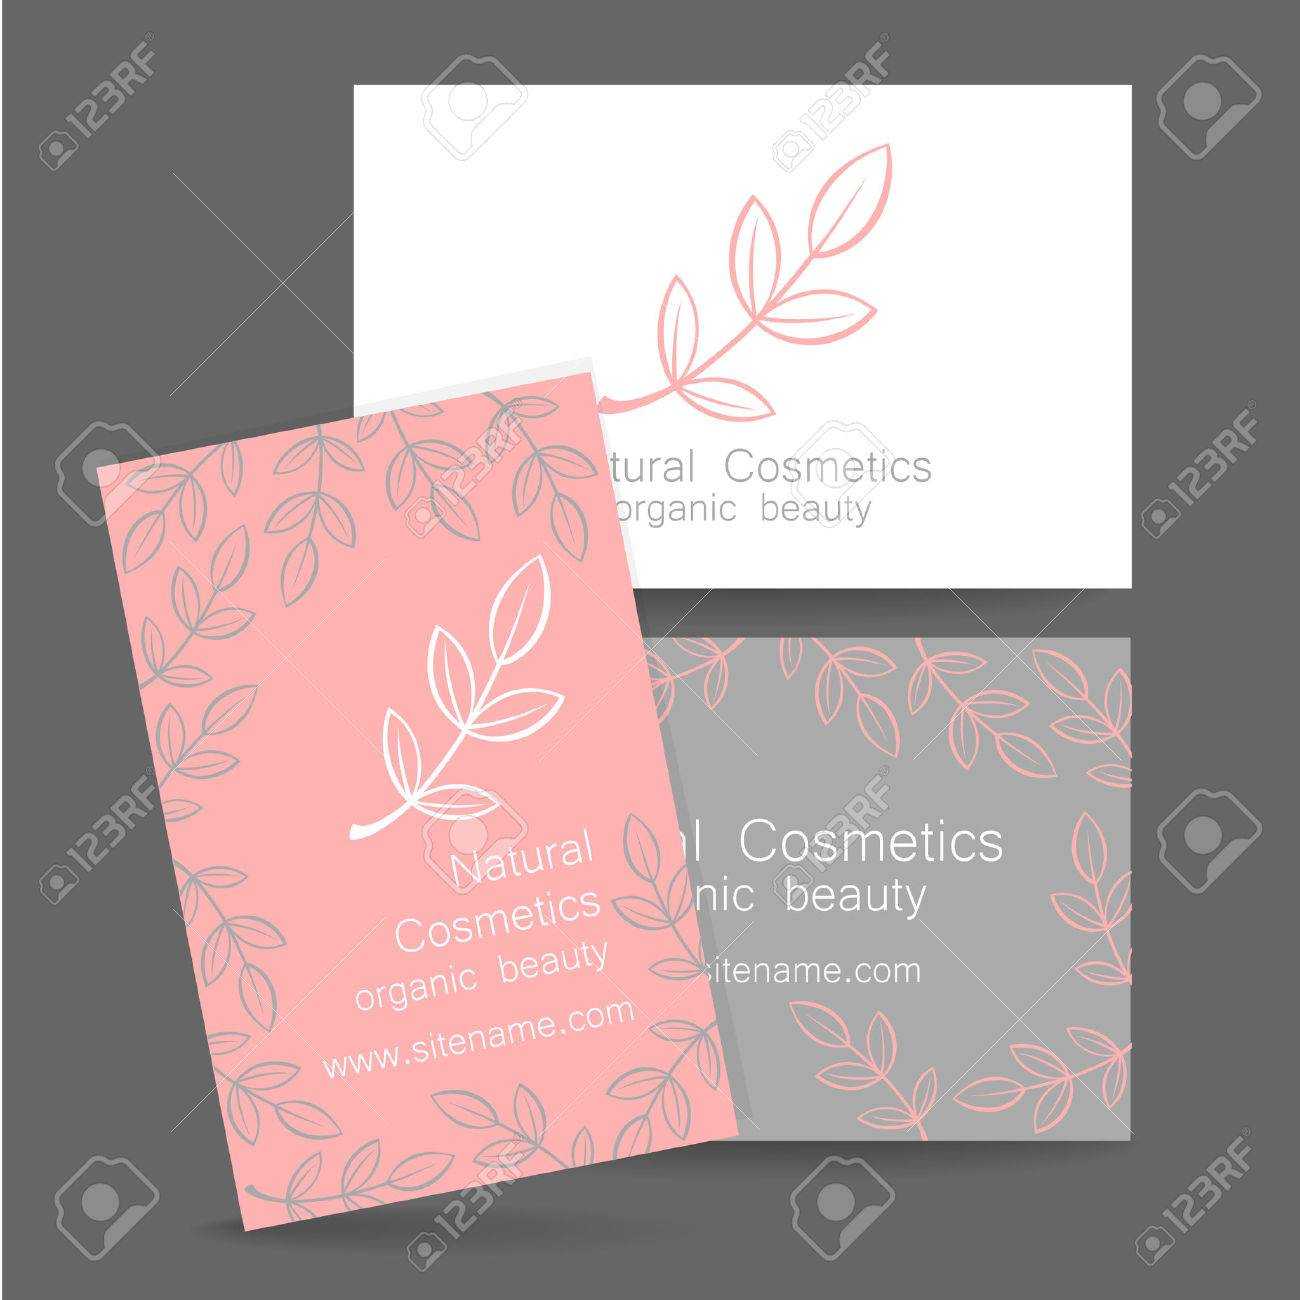 Natural Cosmetics Logo. Template Design For Organic Bio Products With Bio Card Template